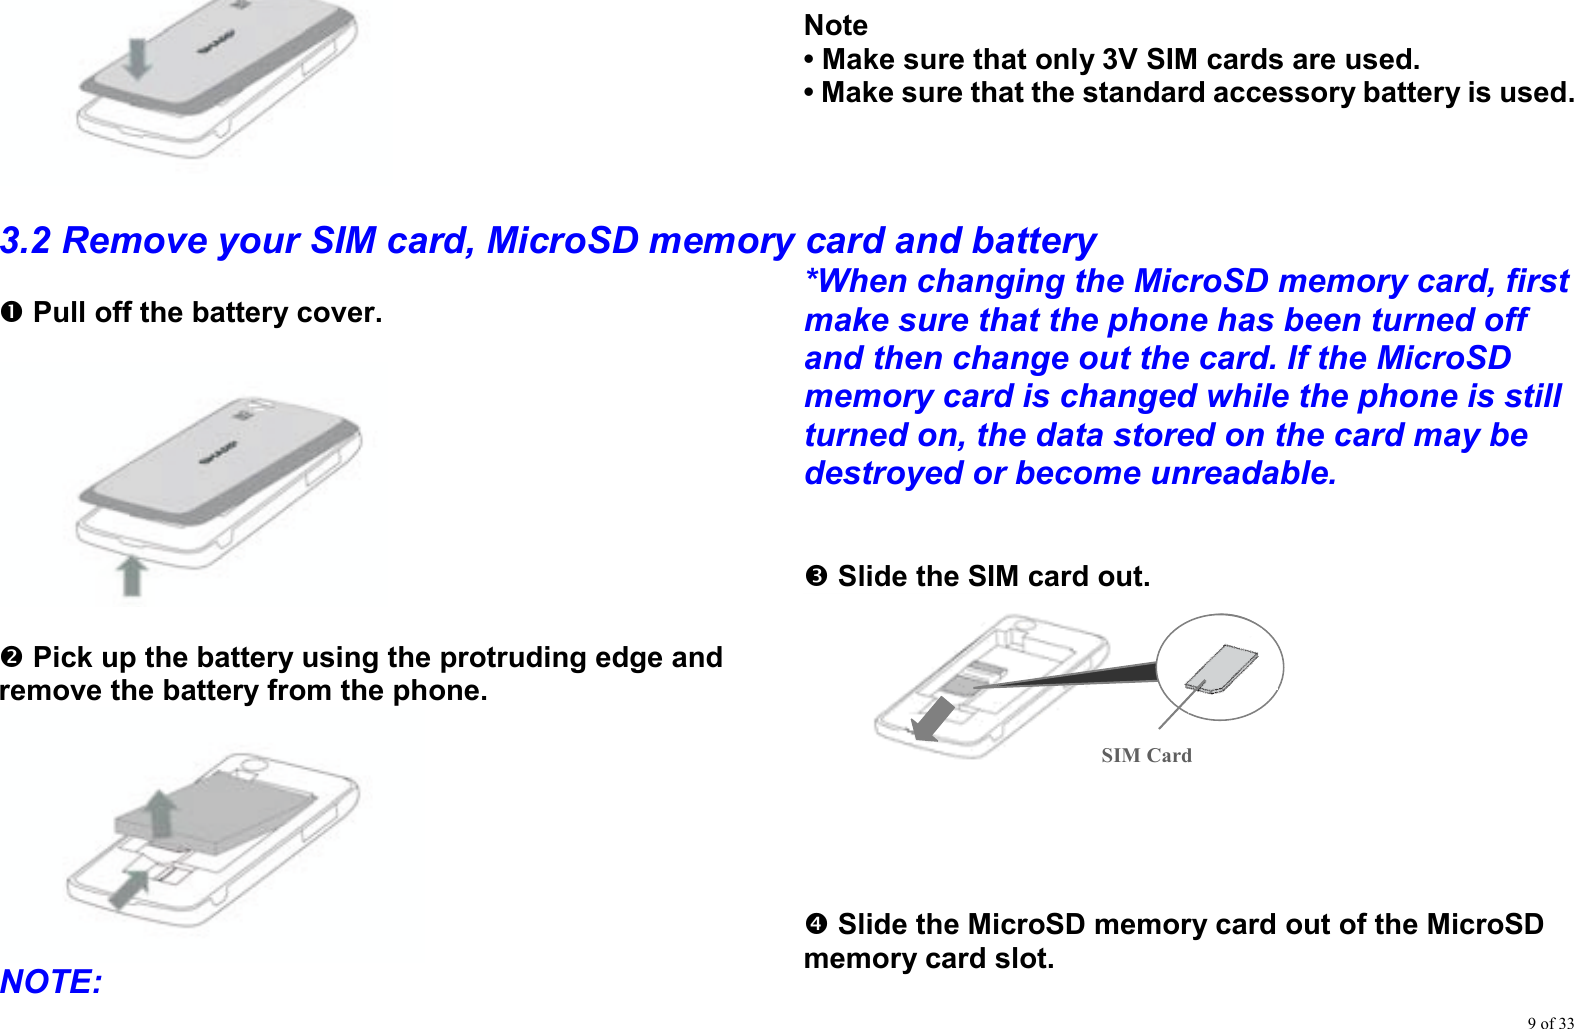 9 of 33     Note • Make sure that only 3V SIM cards are used. • Make sure that the standard accessory battery is used.  3.2 Remove your SIM card, MicroSD memory card and battery n Pull off the battery cover.    o Pick up the battery using the protruding edge and remove the battery from the phone.  NOTE:  *When changing the MicroSD memory card, first make sure that the phone has been turned off and then change out the card. If the MicroSD memory card is changed while the phone is still turned on, the data stored on the card may be destroyed or become unreadable.   p Slide the SIM card out.      q Slide the MicroSD memory card out of the MicroSD memory card slot.  SIM Card 